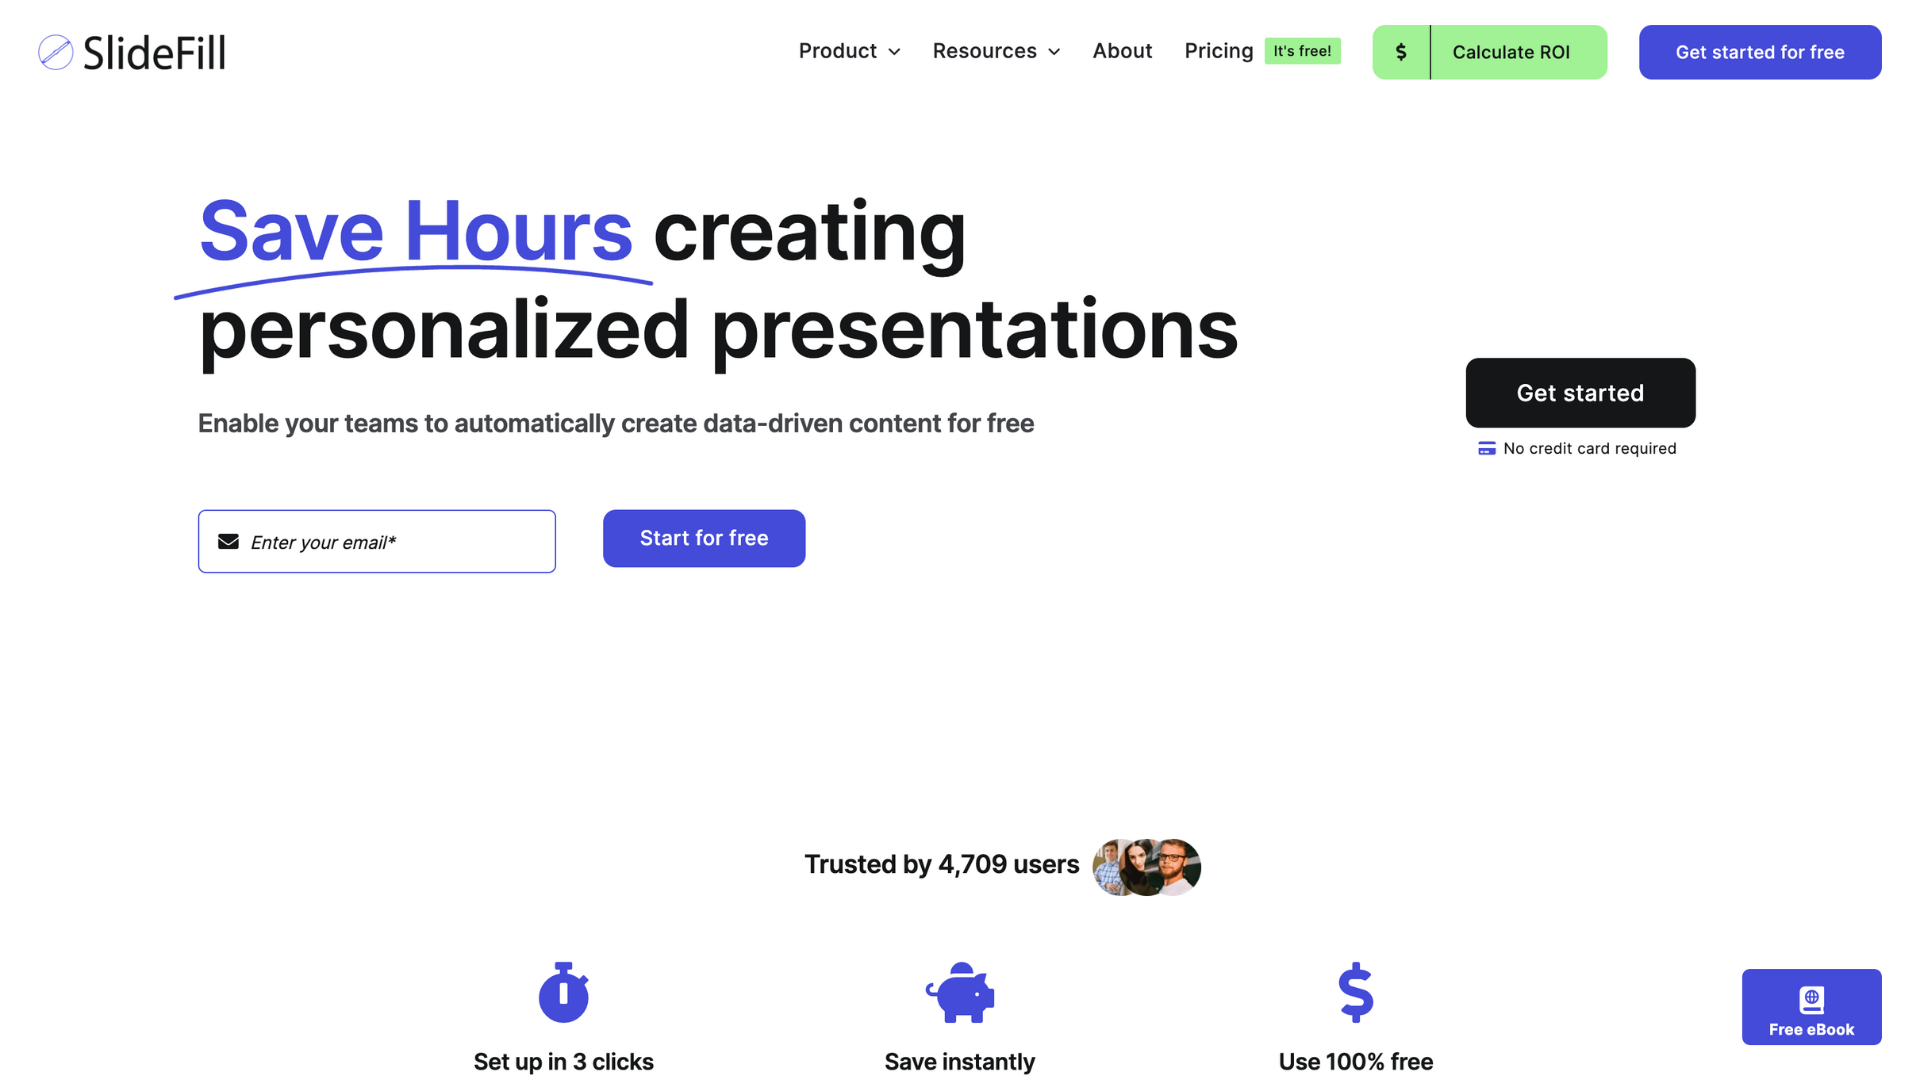 SlideFill Home - Save hours creating personalized presentations